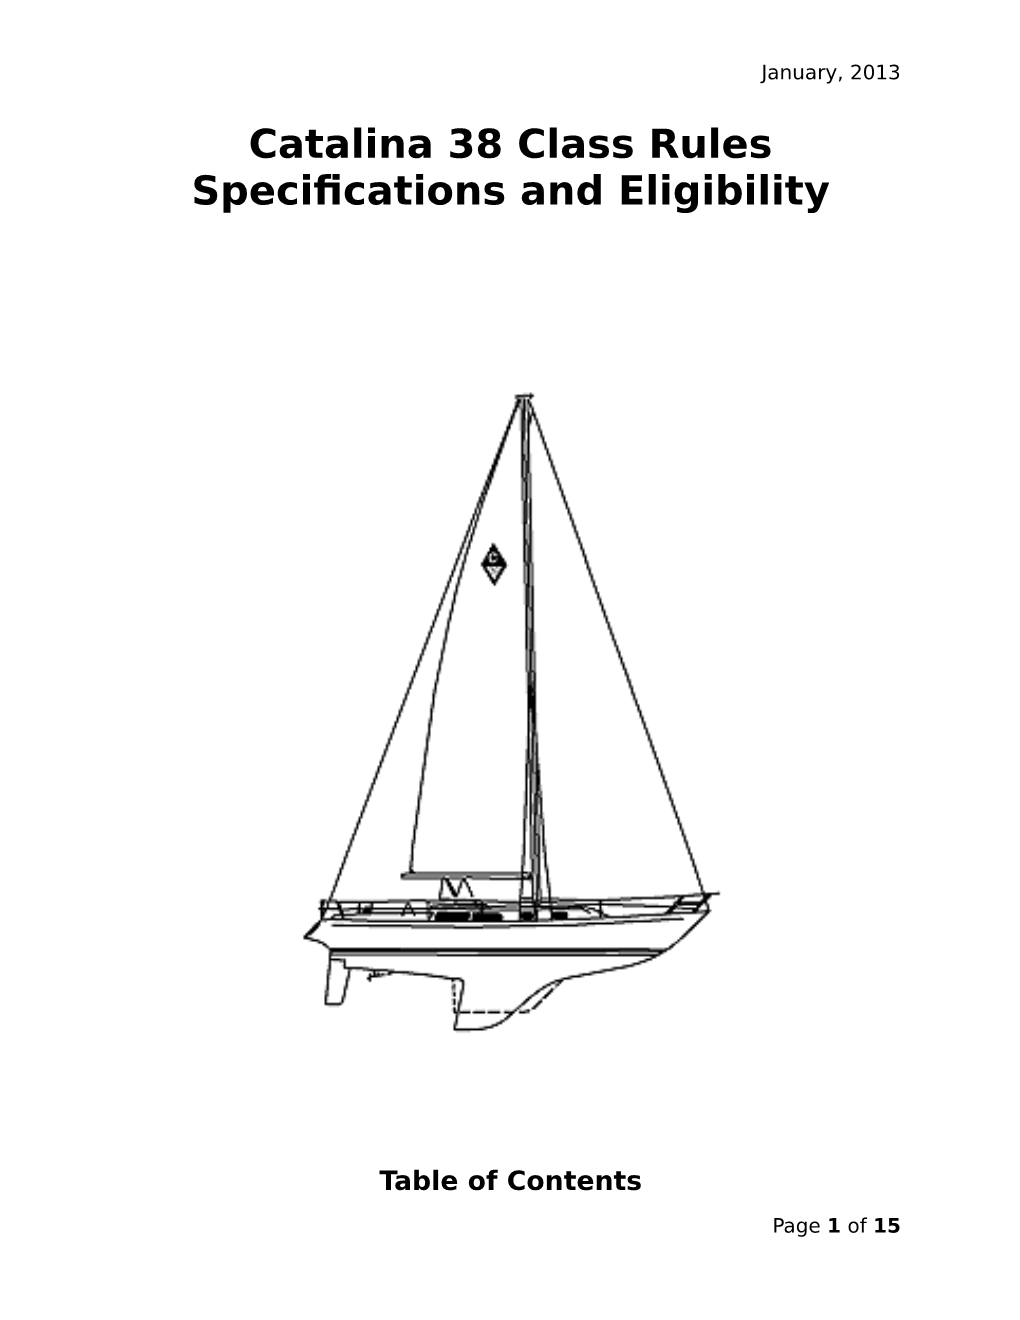 Catalina 38 Class Rules Specifications and Eligibility